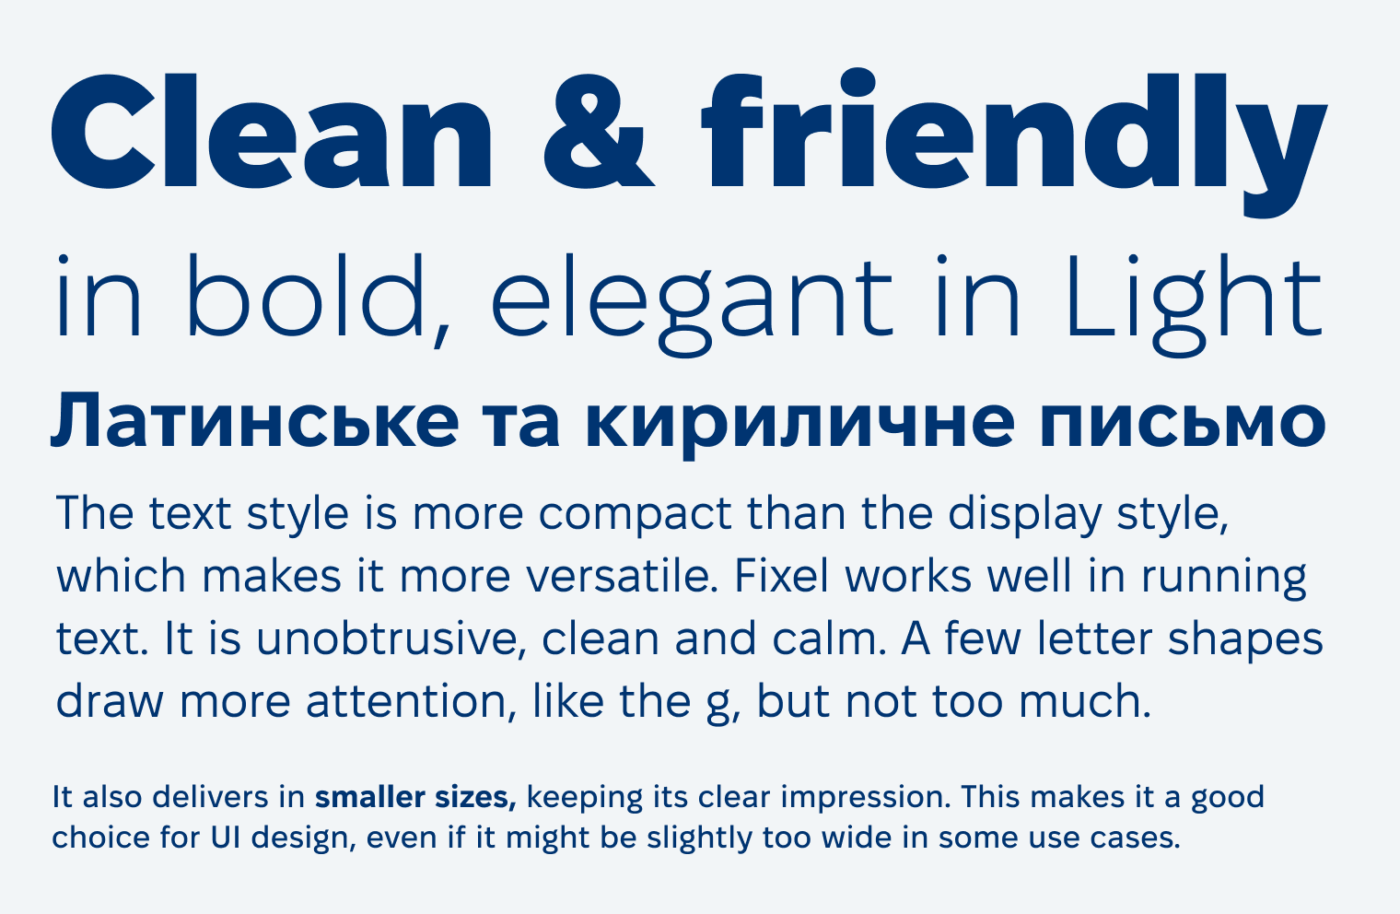 Clean and friendly in bold, elegant in Light
Латинське та кириличне письмо
The text style is more compact than the display style, which makes it more versatile. Fixel works well in running text. It is unobtrusive, clean and calm. A few letter shapes draw more attention, like the g, but not too much.
It also delivers in smaller sizes, keeping its clear impression. This makes it a good choice for I design, even if it might be slightly too wide in some use cases.